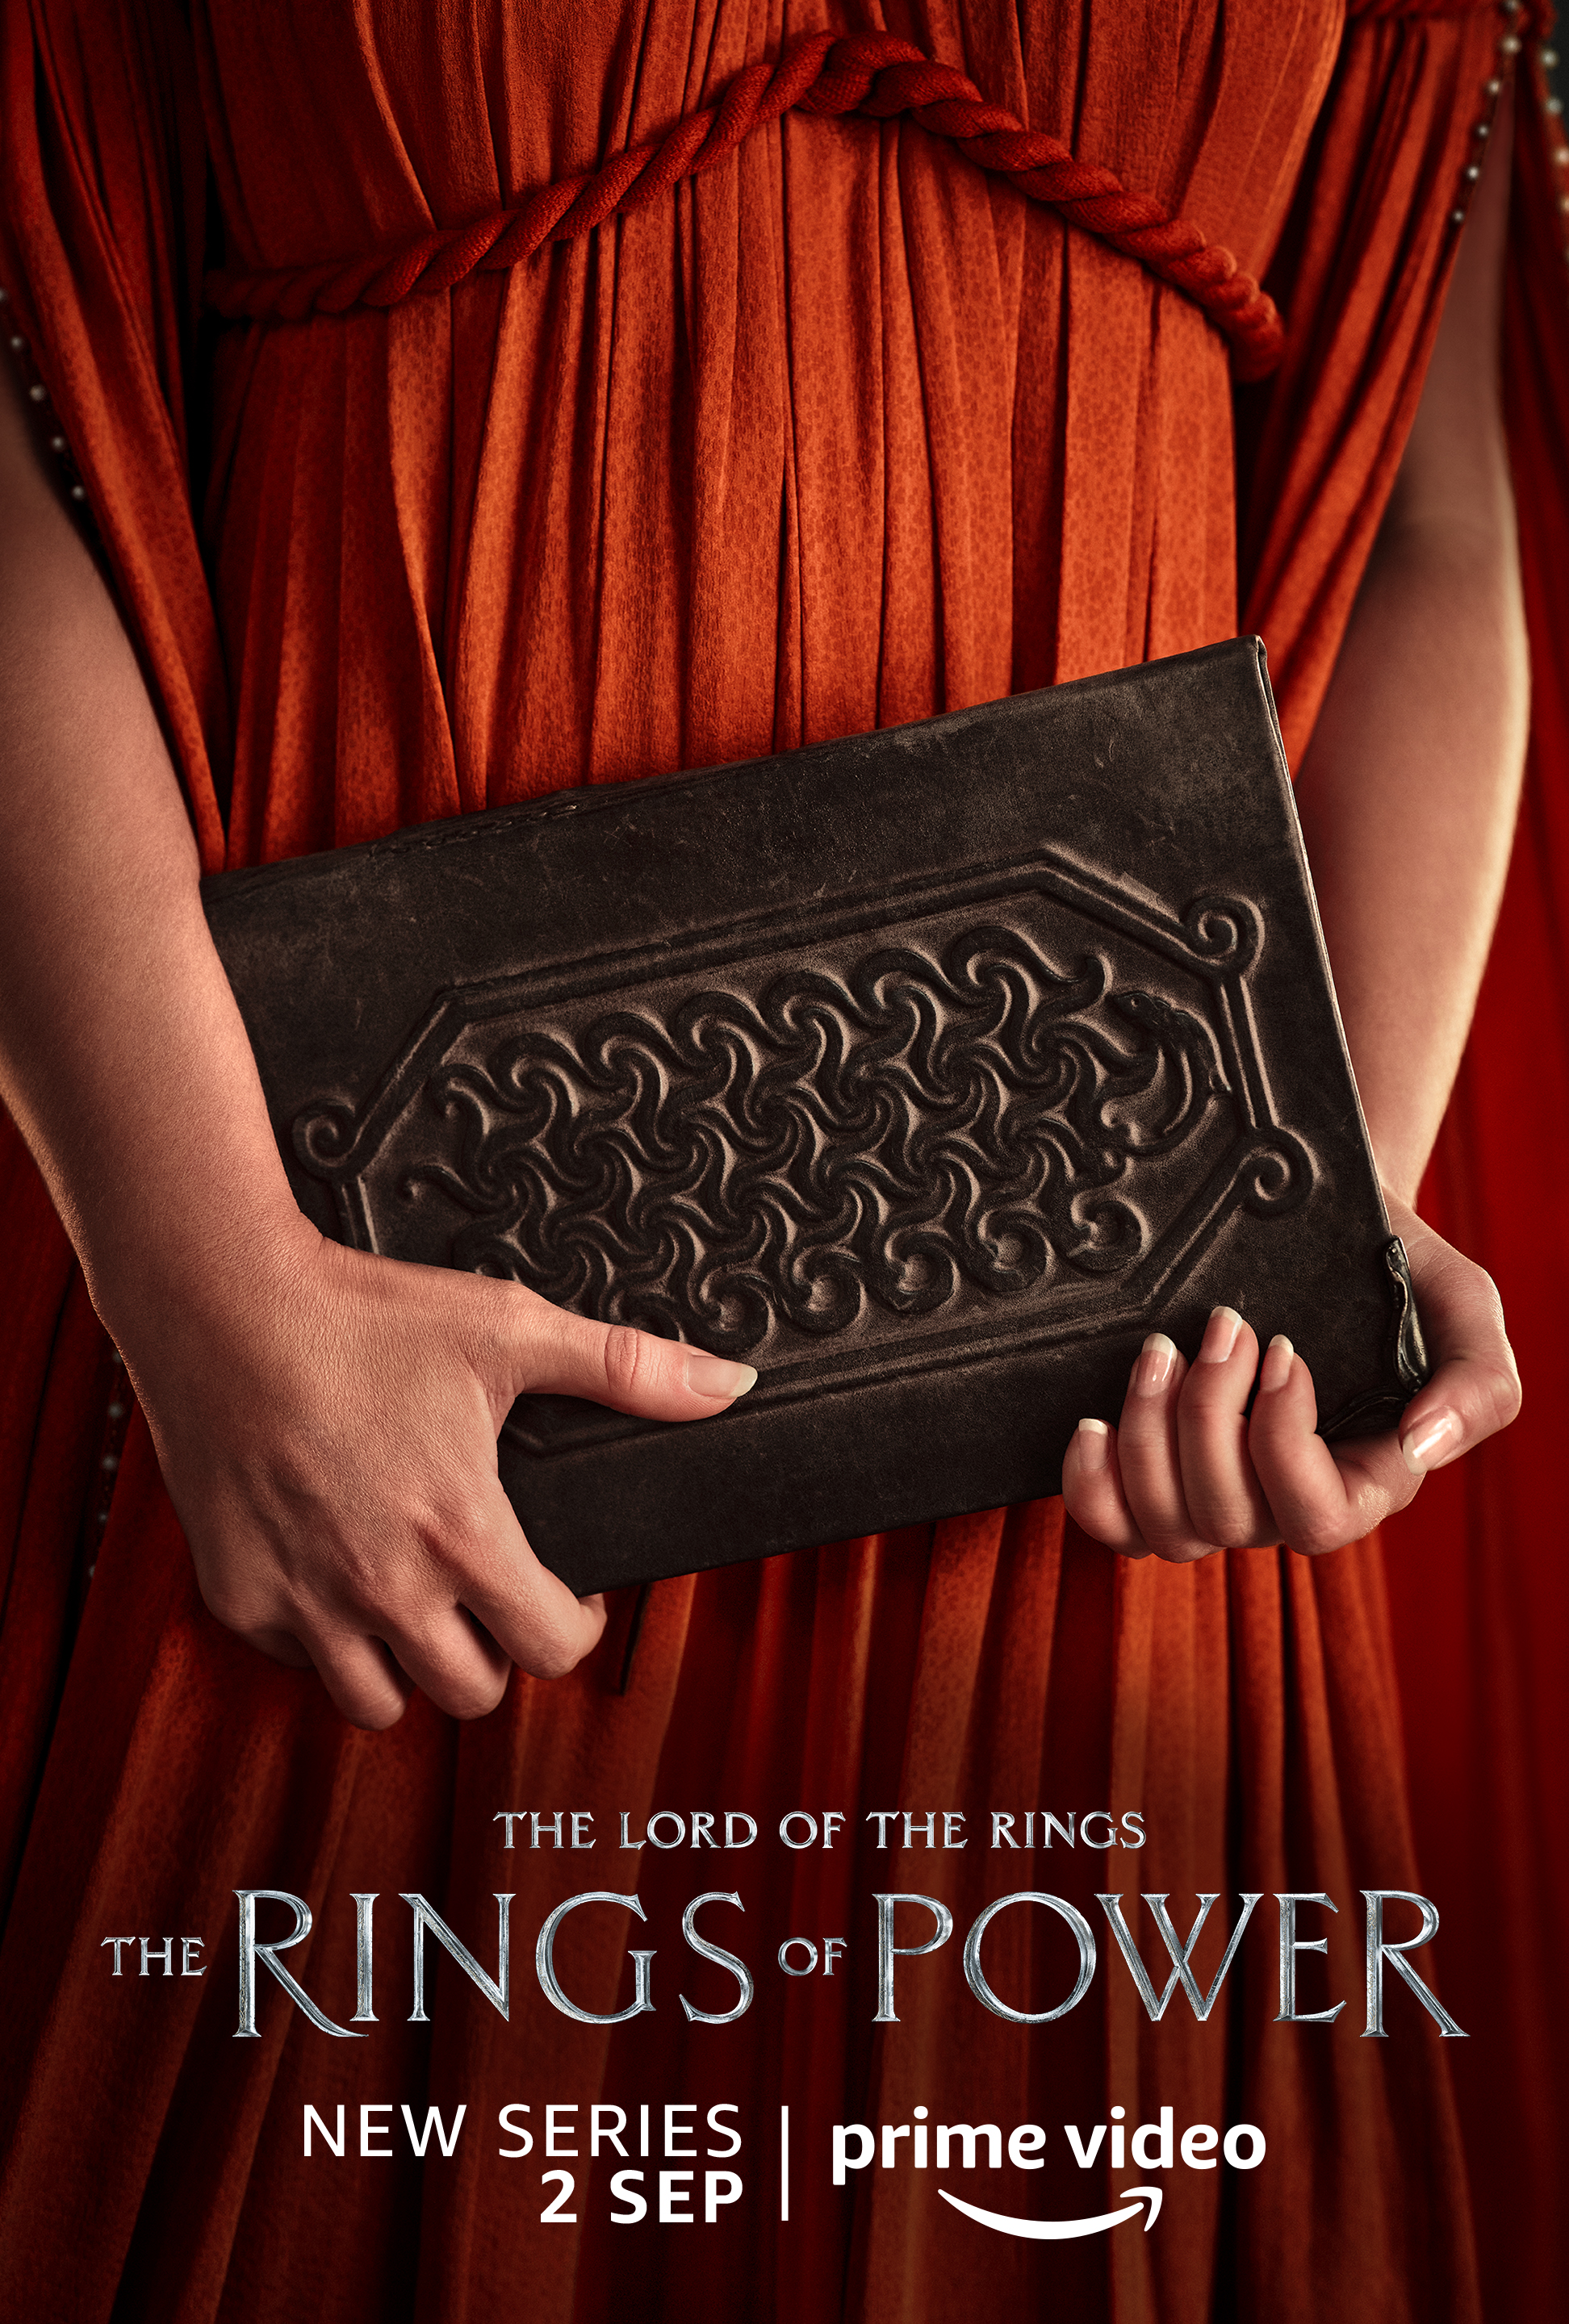 A woman holding a book character poster for Lord of the Rings: The Rings of Power